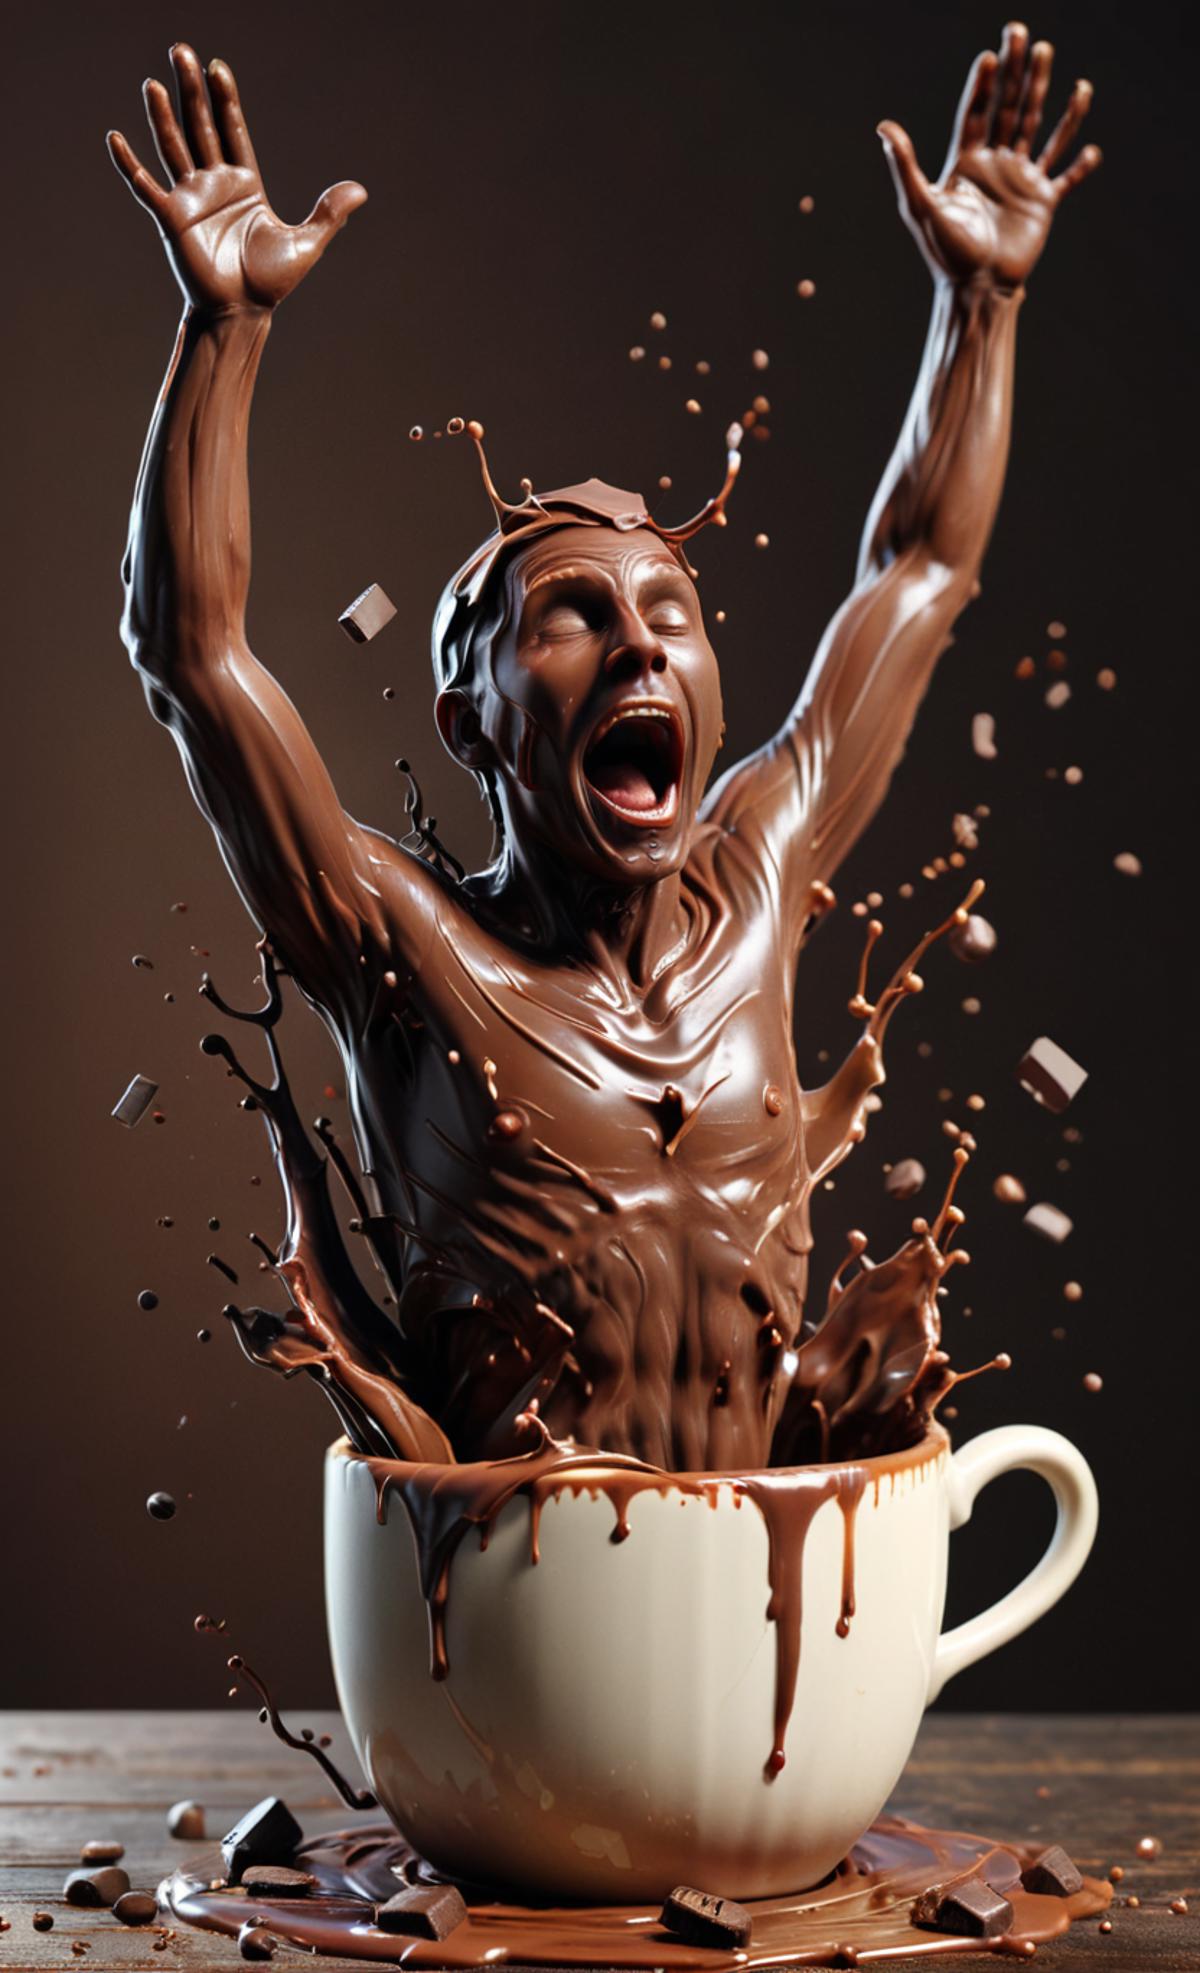 A man who has been turned into chocolate is screaming and falling into a mug of hot chocolate.